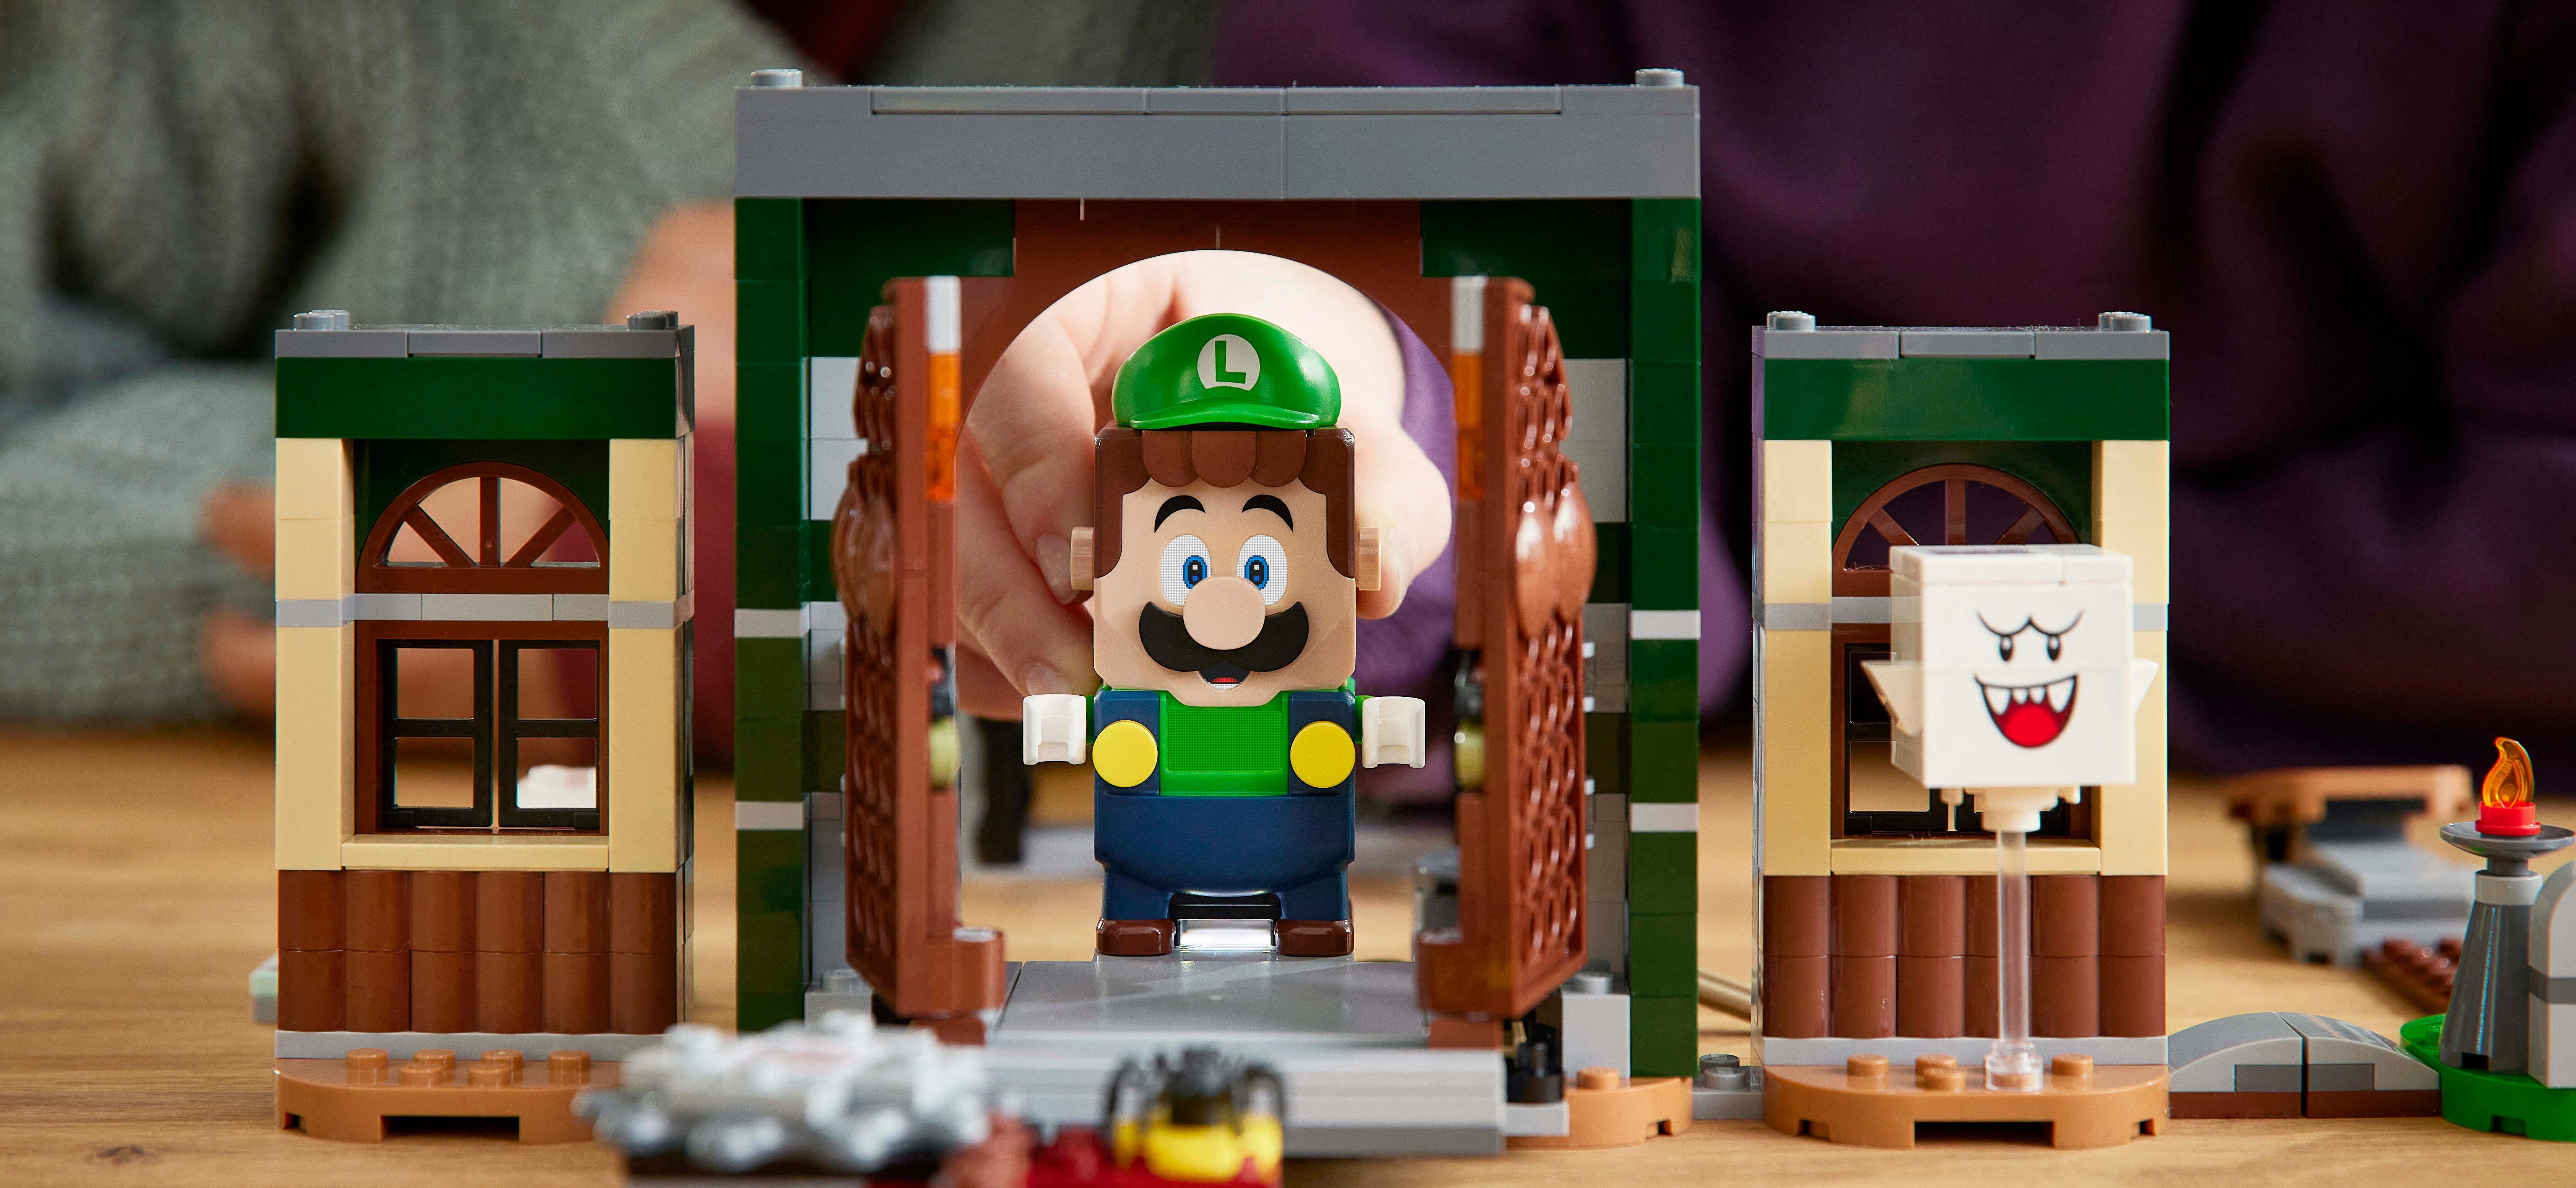 New LEGO Super Mario theme to hit shelves 1 January 2022 for some ghost-catching fun